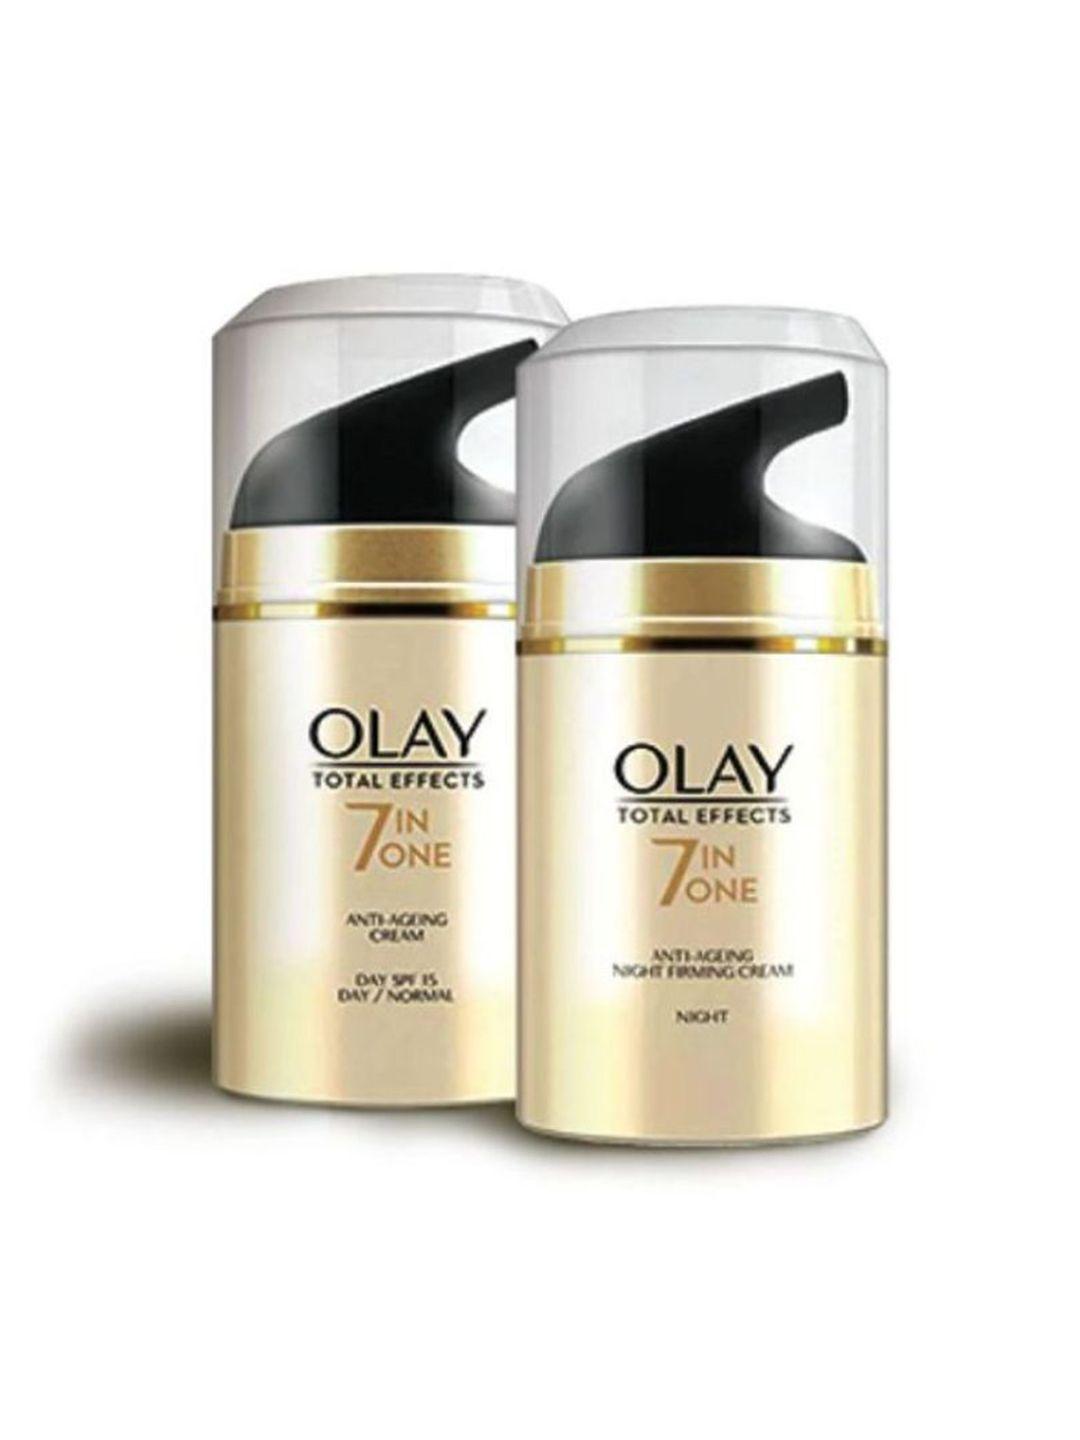 olay slay all day set of total effects 7-in-one day cream & night cream - 50 g each